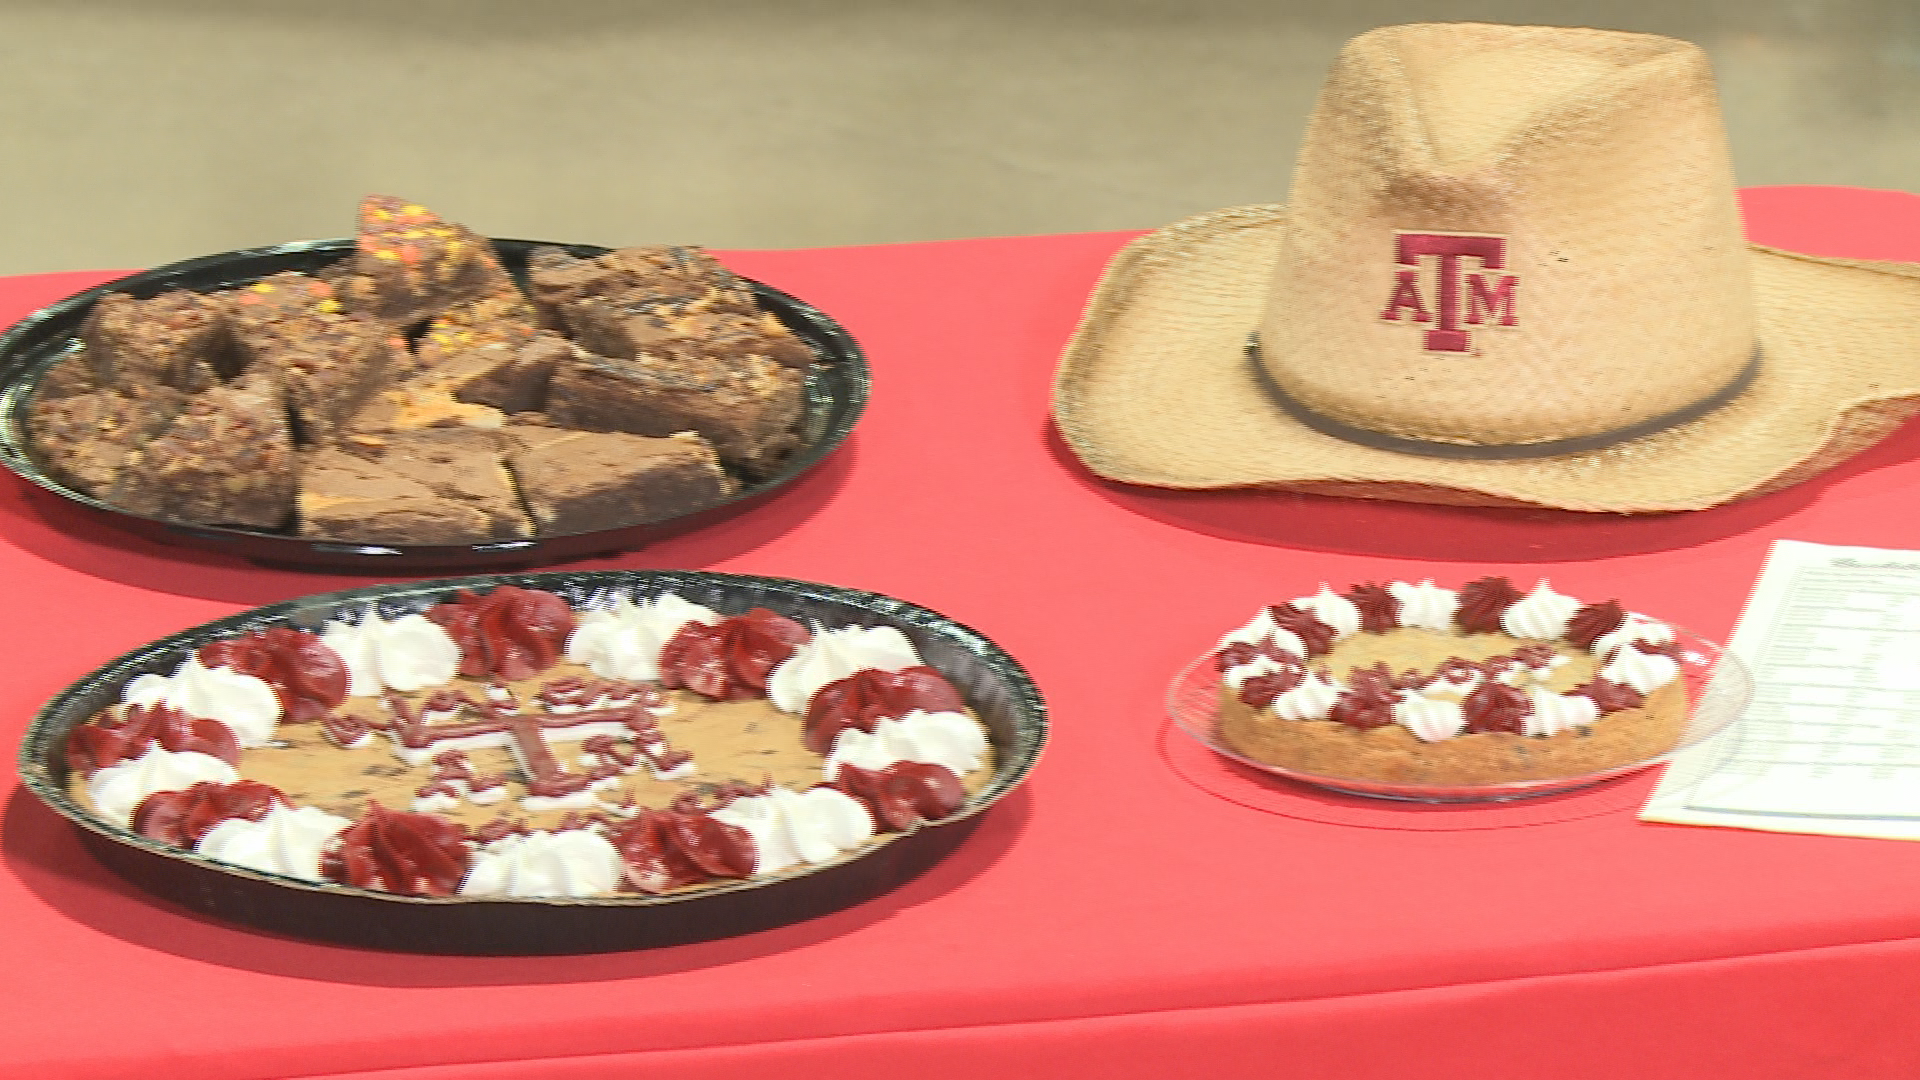 Make a game plan for Aggie gameday with Brookshire Brothers